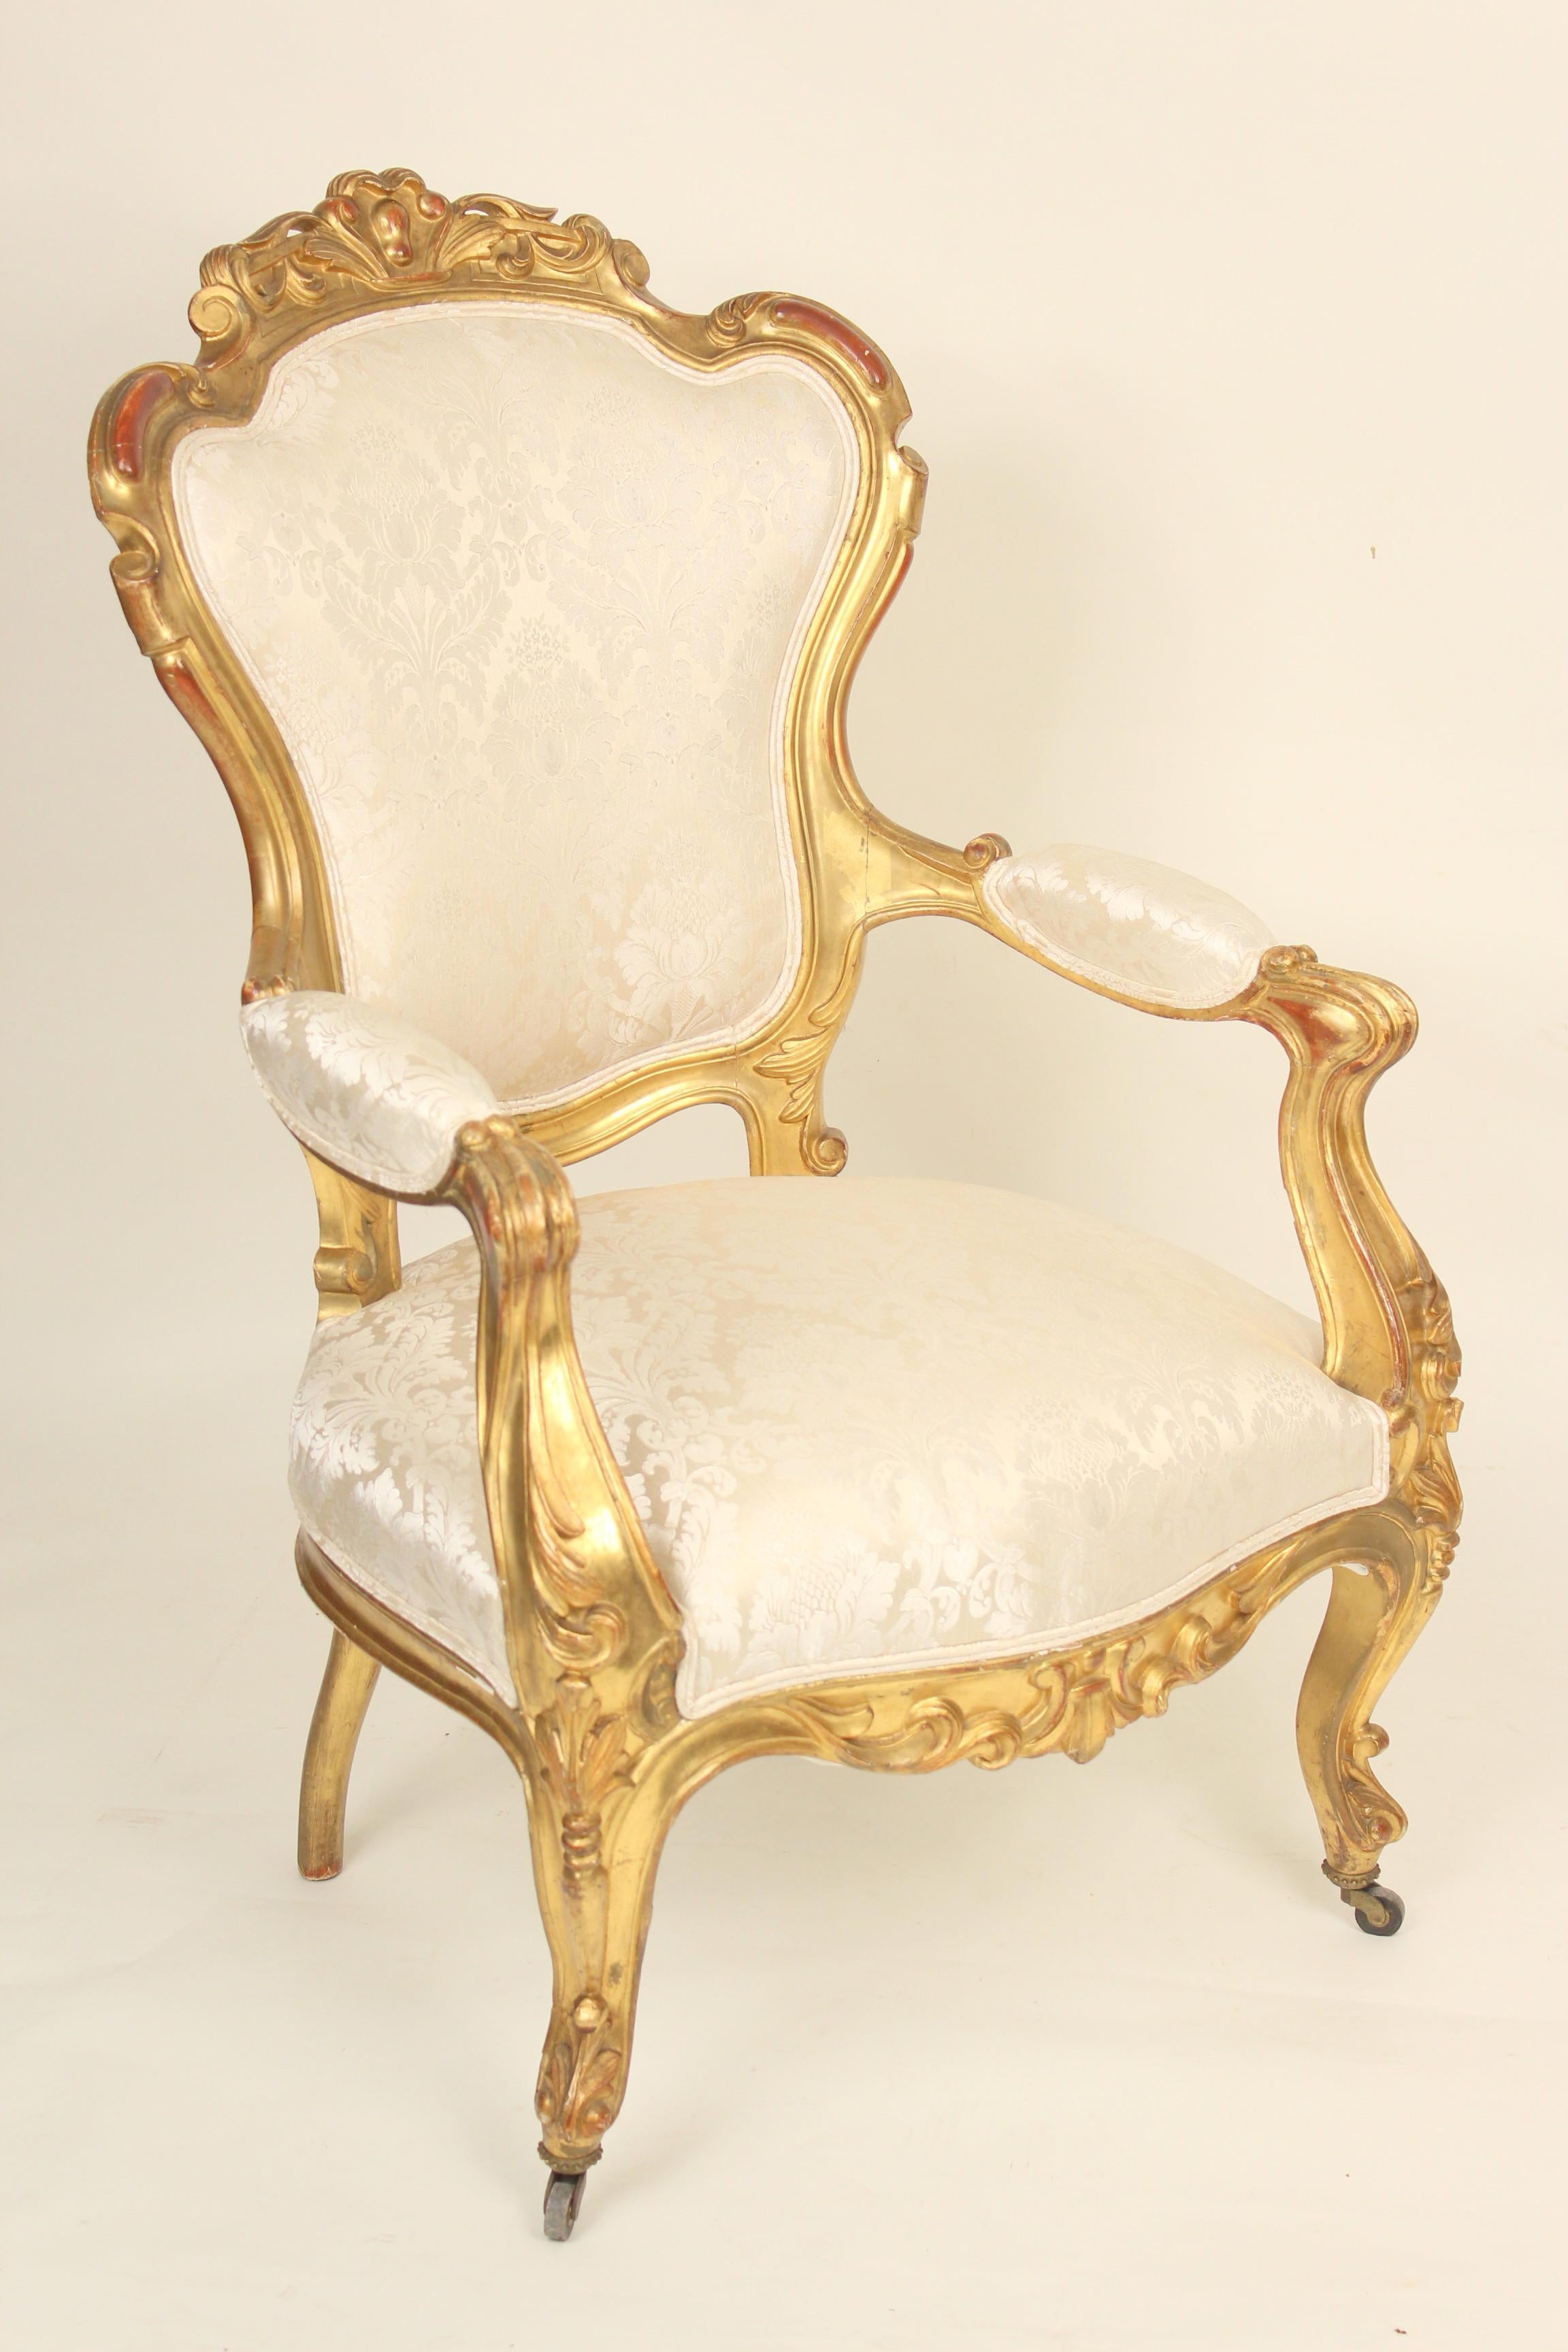 Pair of continental (possibly Venetian) Napoleon III gilt wood armchairs, 19th century. These chairs have old original gold leaf finish with some paint touch, mostly on the backs. The frames are tight and the upholstery is new and in excellent